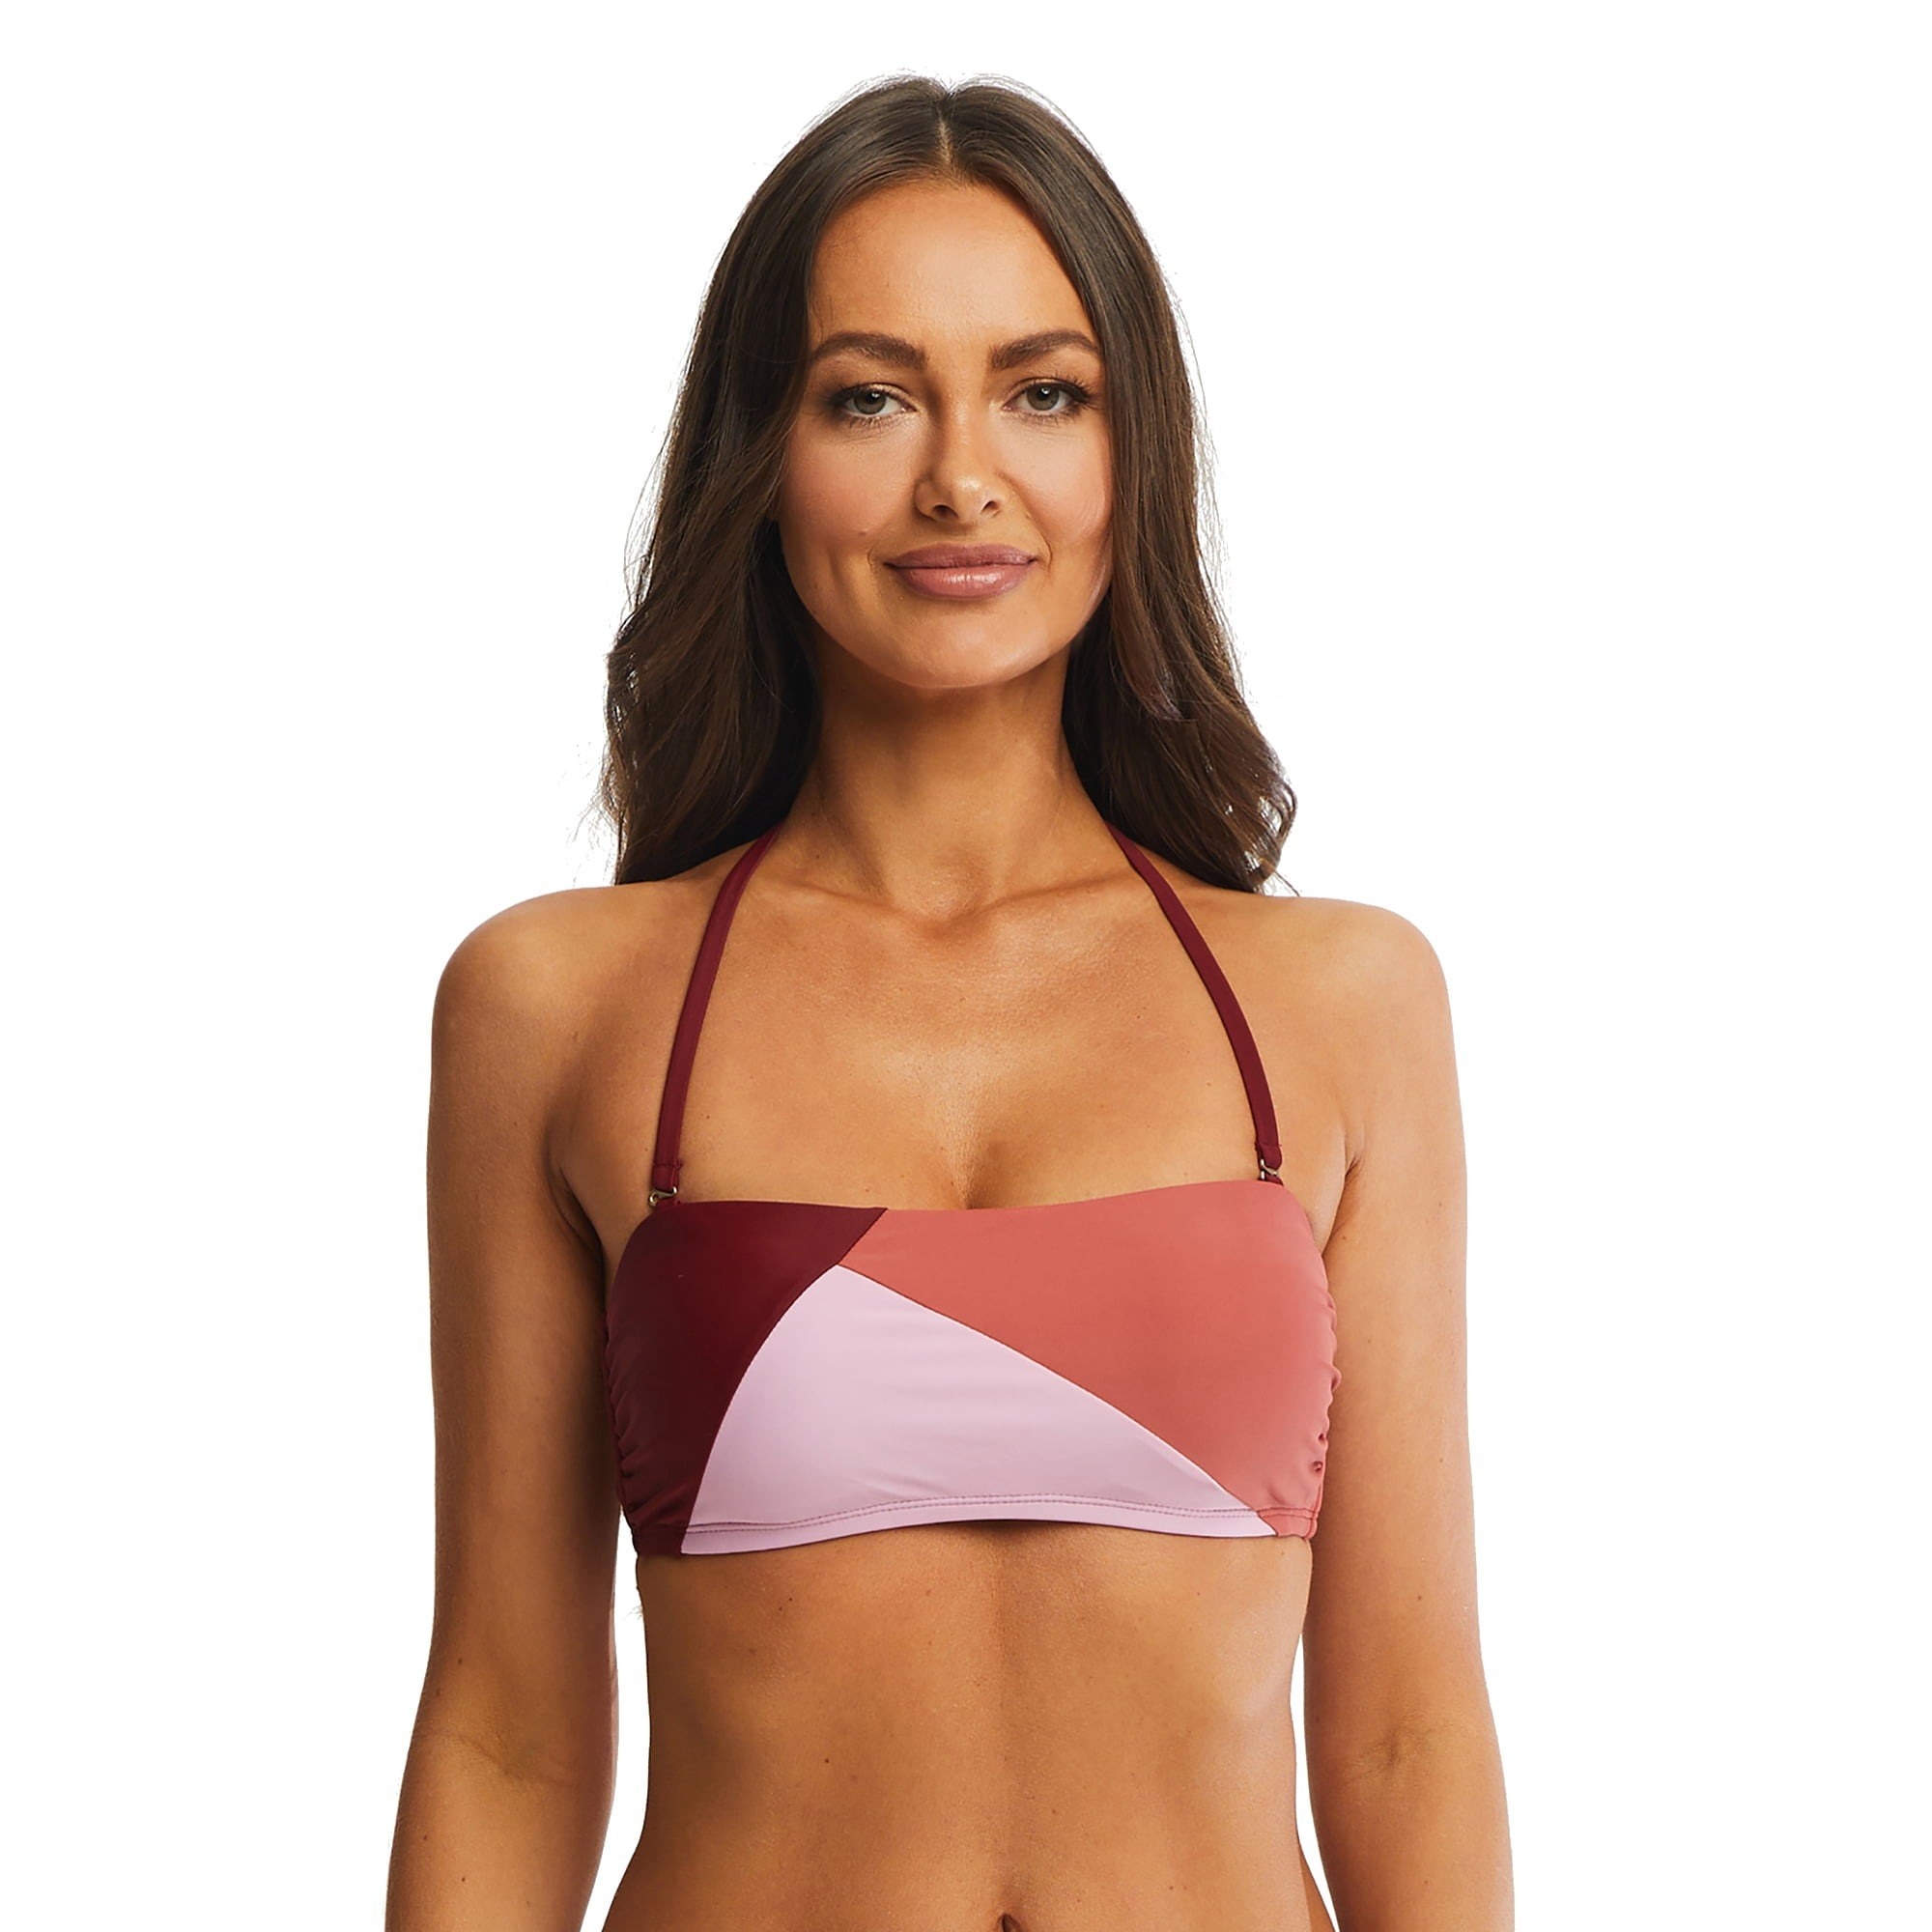 Model wearing bandeau top with three shades of pink color block design